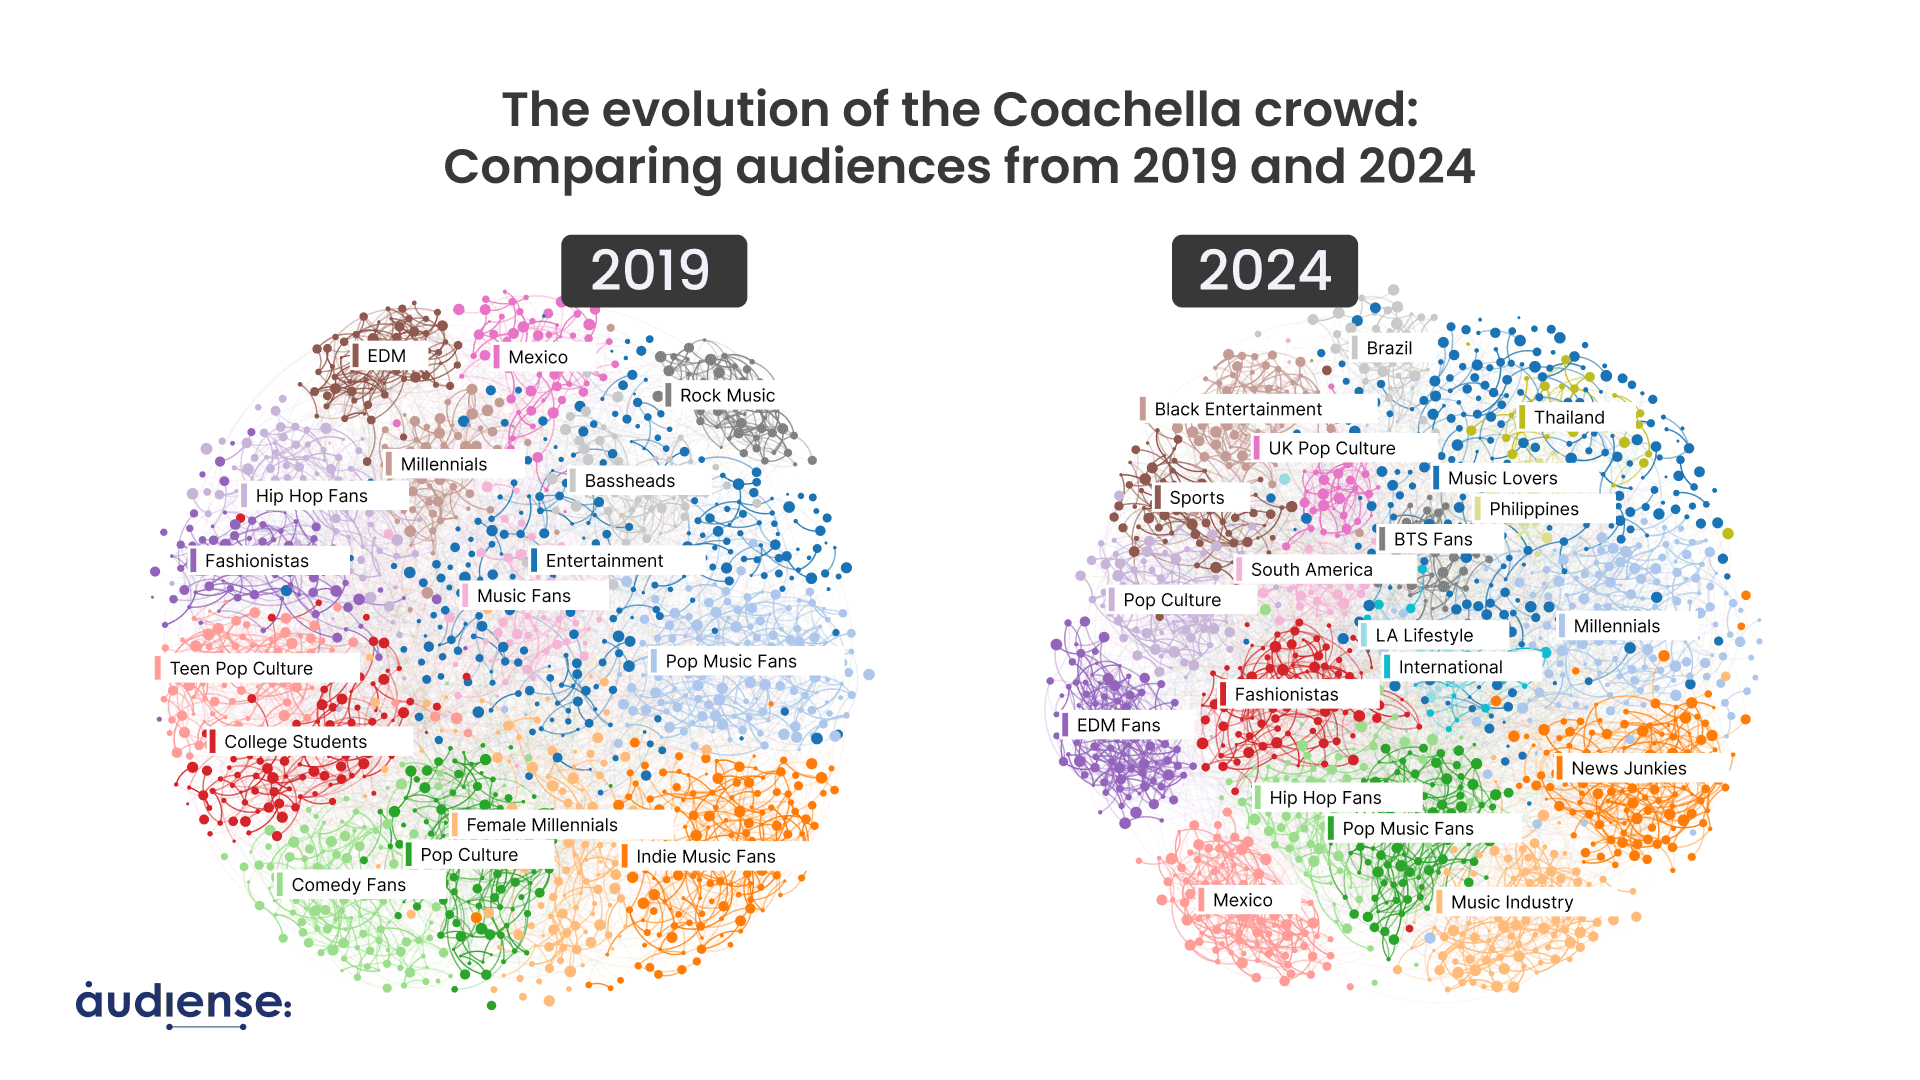 image:  The Evolution of the Coachella Crowd: Comparing audiences from 2019 and 2024